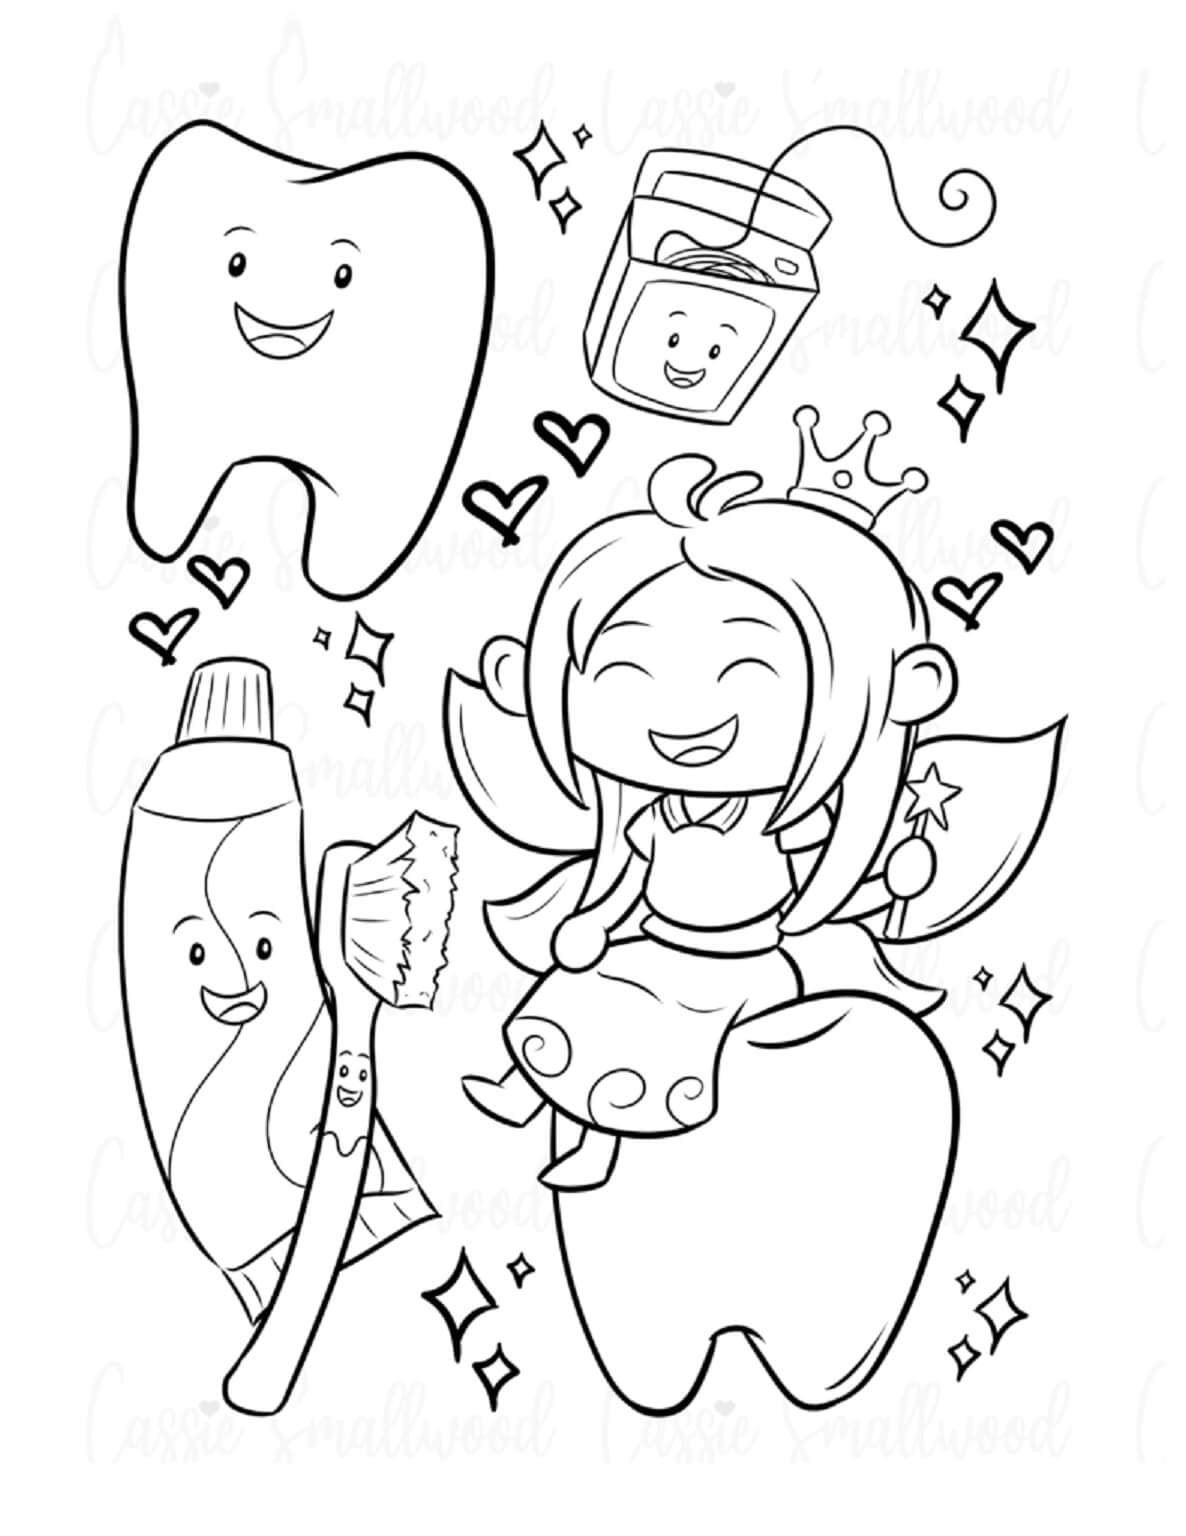 Tooth fairy image coloring page